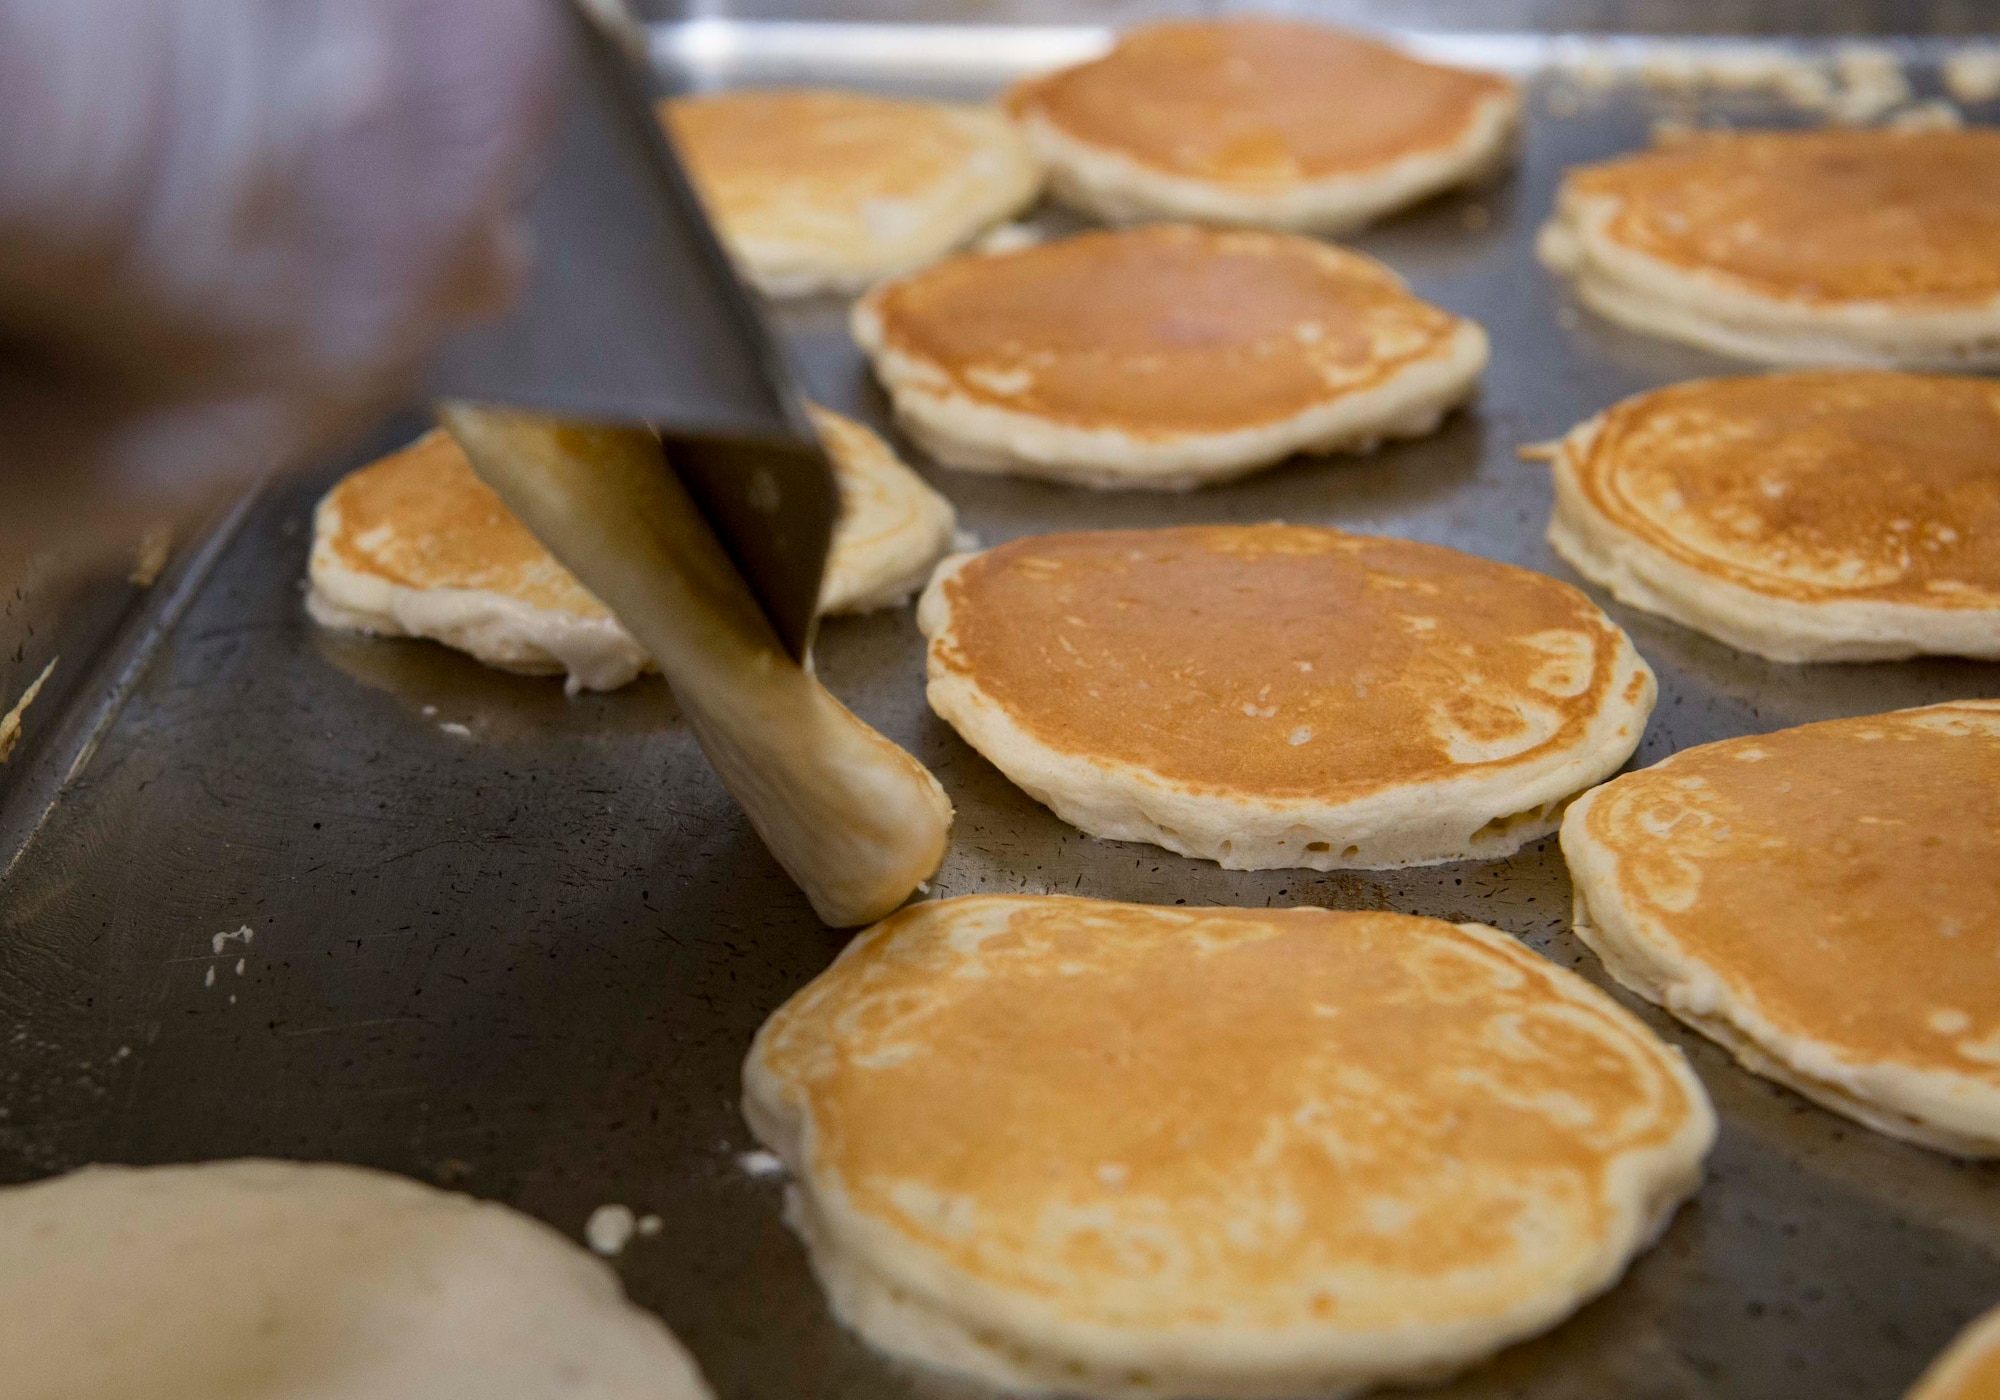 U.S. Air Force Airman 1st Class Saul Ramos-Garcia, 786th Force Support Squadron Rheinland Inn shift leader, flips pancakes on Ramstein Air Base, Germany, Nov. 3, 2017. The inn provides access to ready-made meals for Ramstein personnel living in the dorms. (U.S. Air Force photo by Senior Airman Elizabeth Baker)